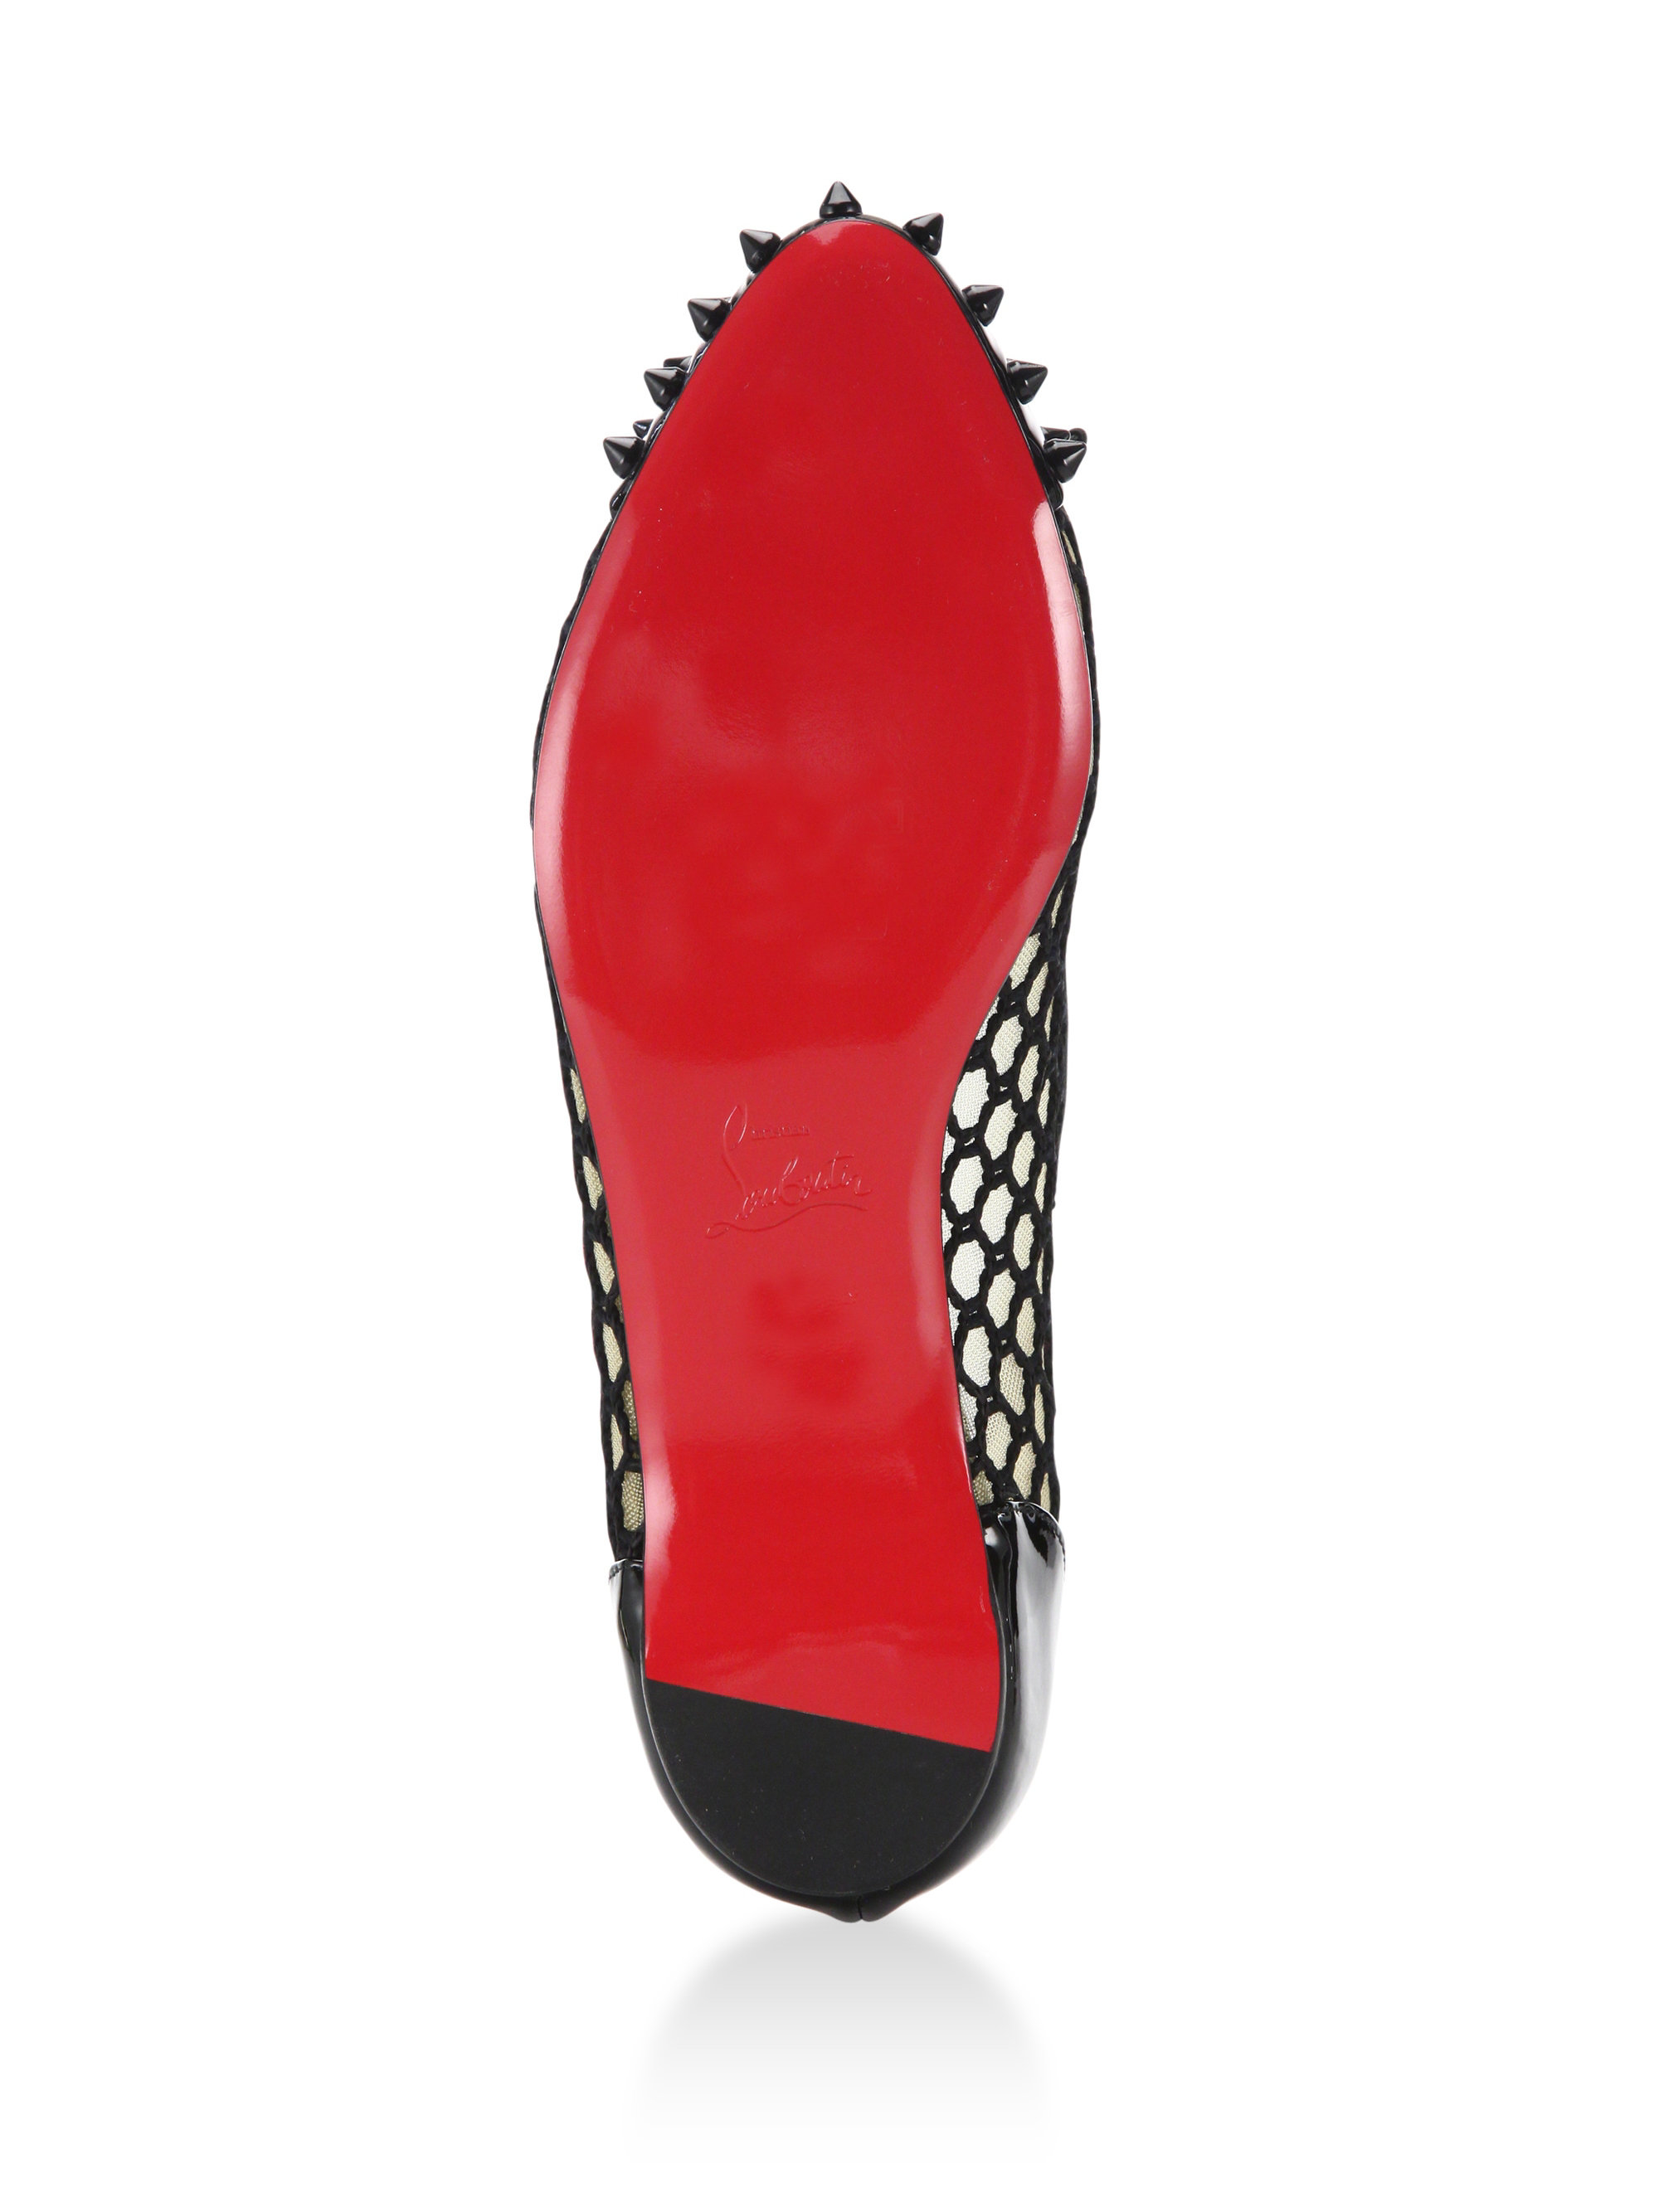 Christian Louboutin Mix Spiked Patent Leather & Mesh Flats in Black